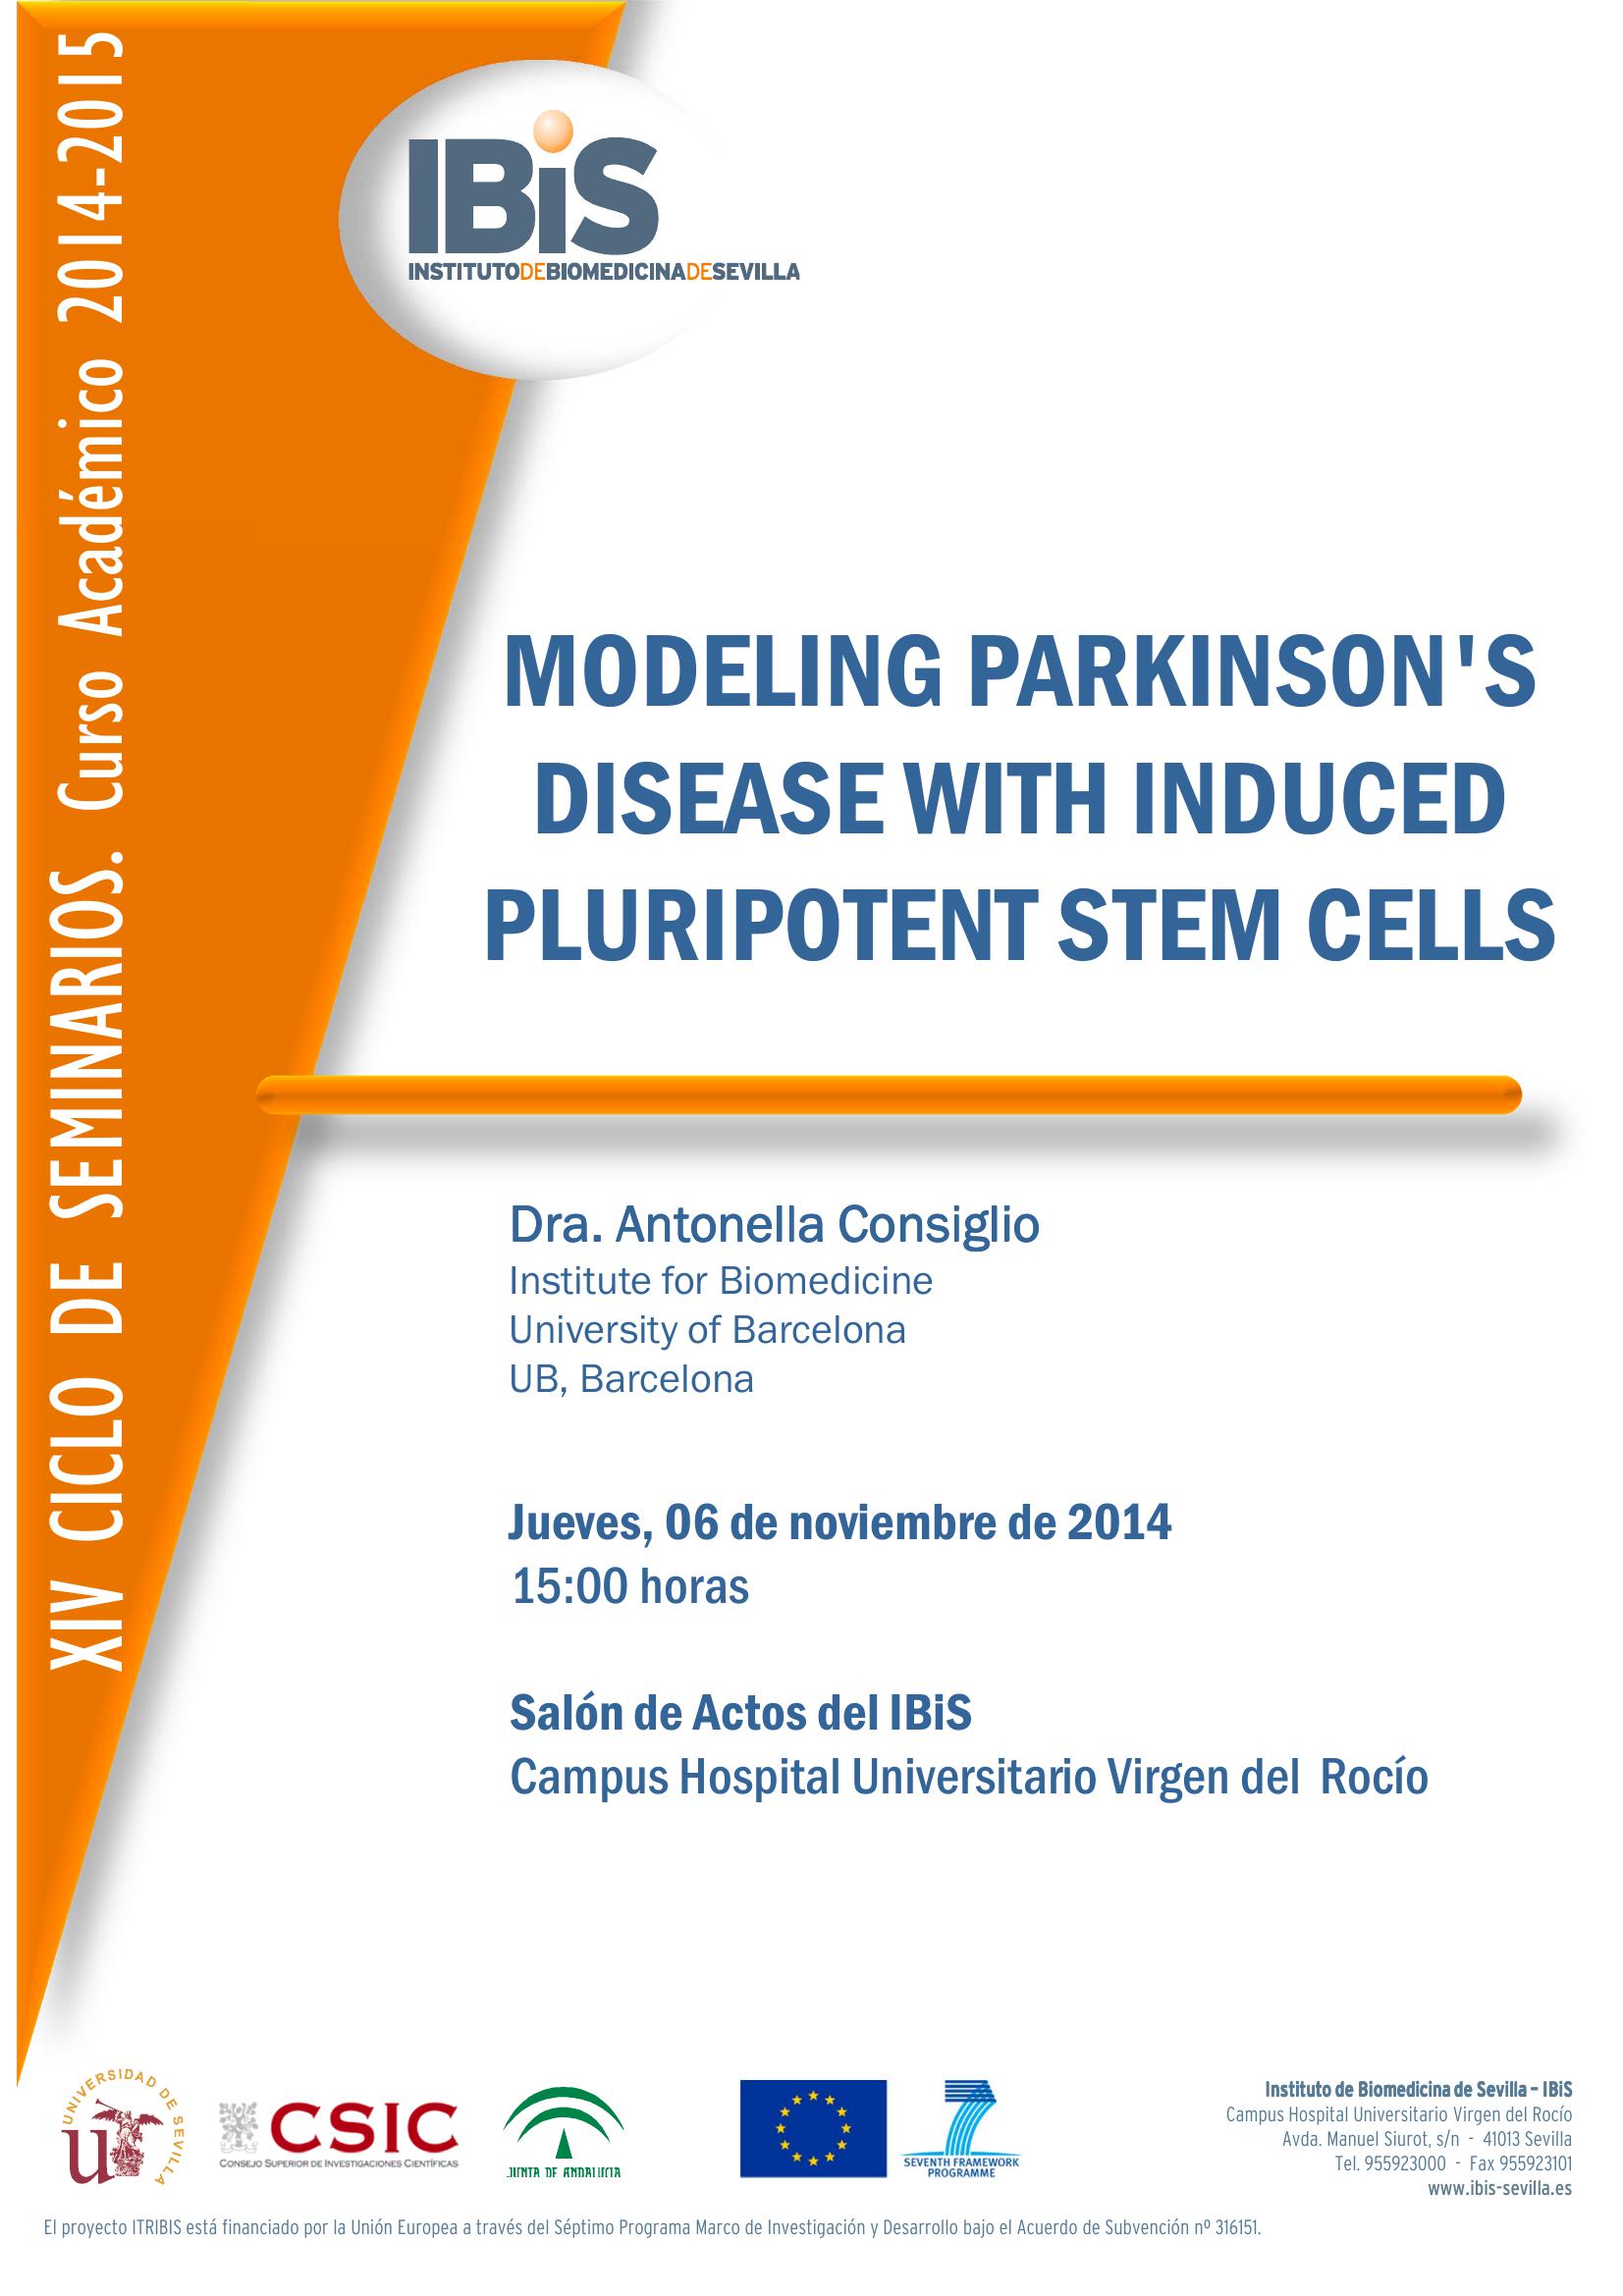 Poster: MODELING PARKINSON'S DISEASE WITH INDUCED PLURIPOTENT STEM CELLS